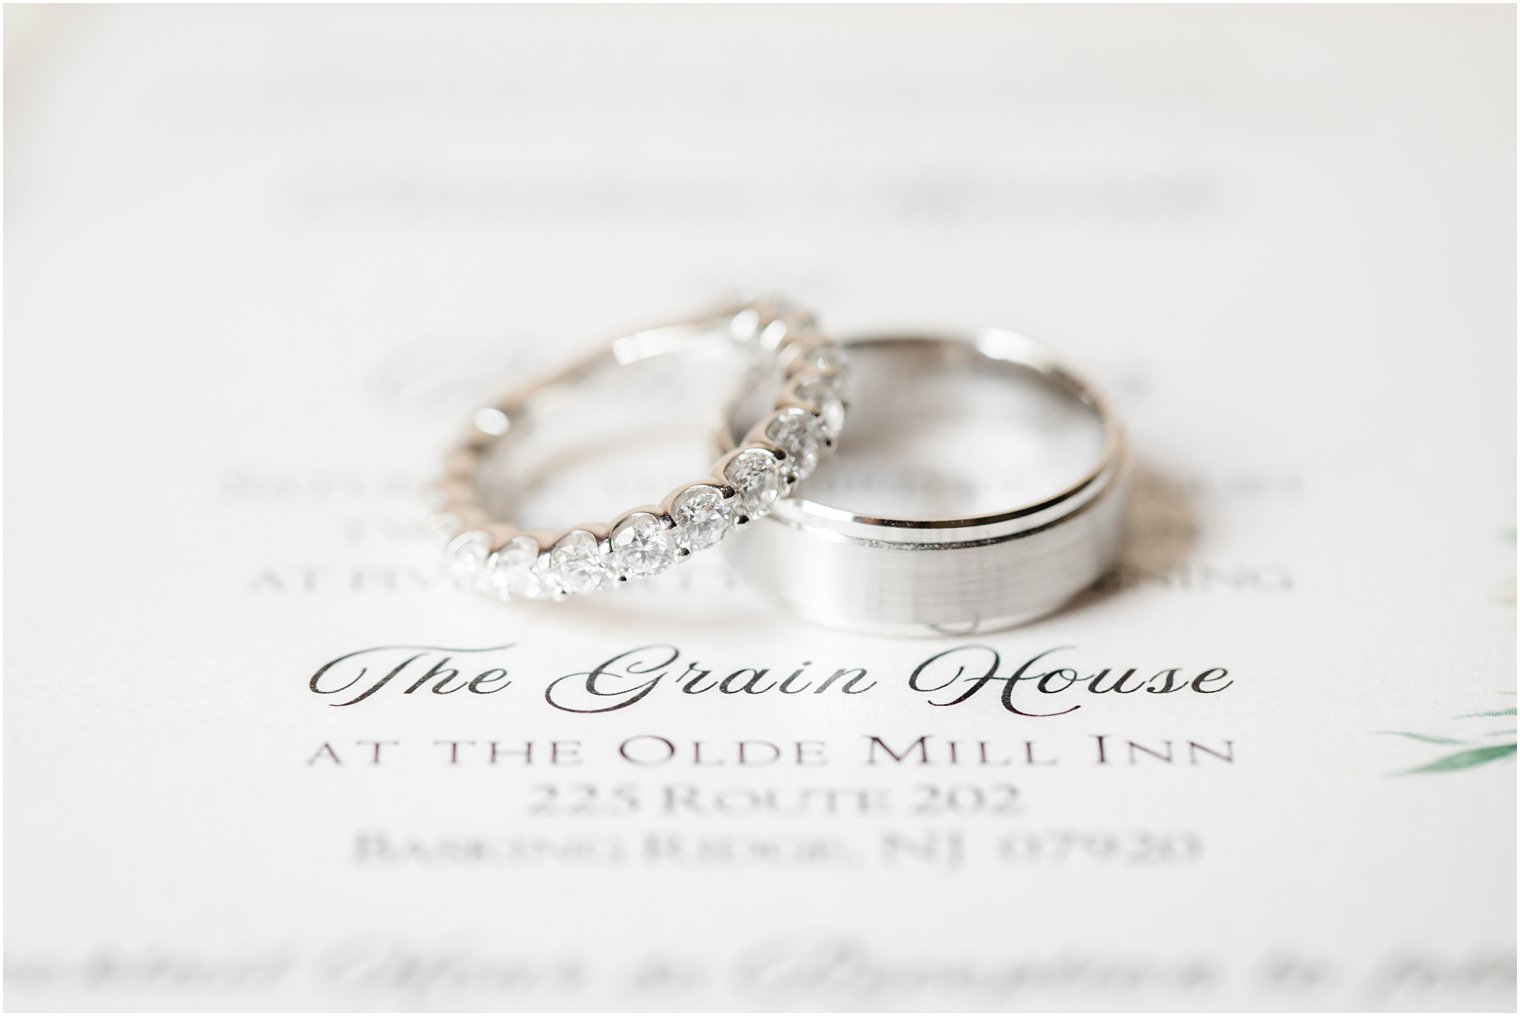 Wedding bands on invitation for wedding at The Grain House at the Olde Mill Inn